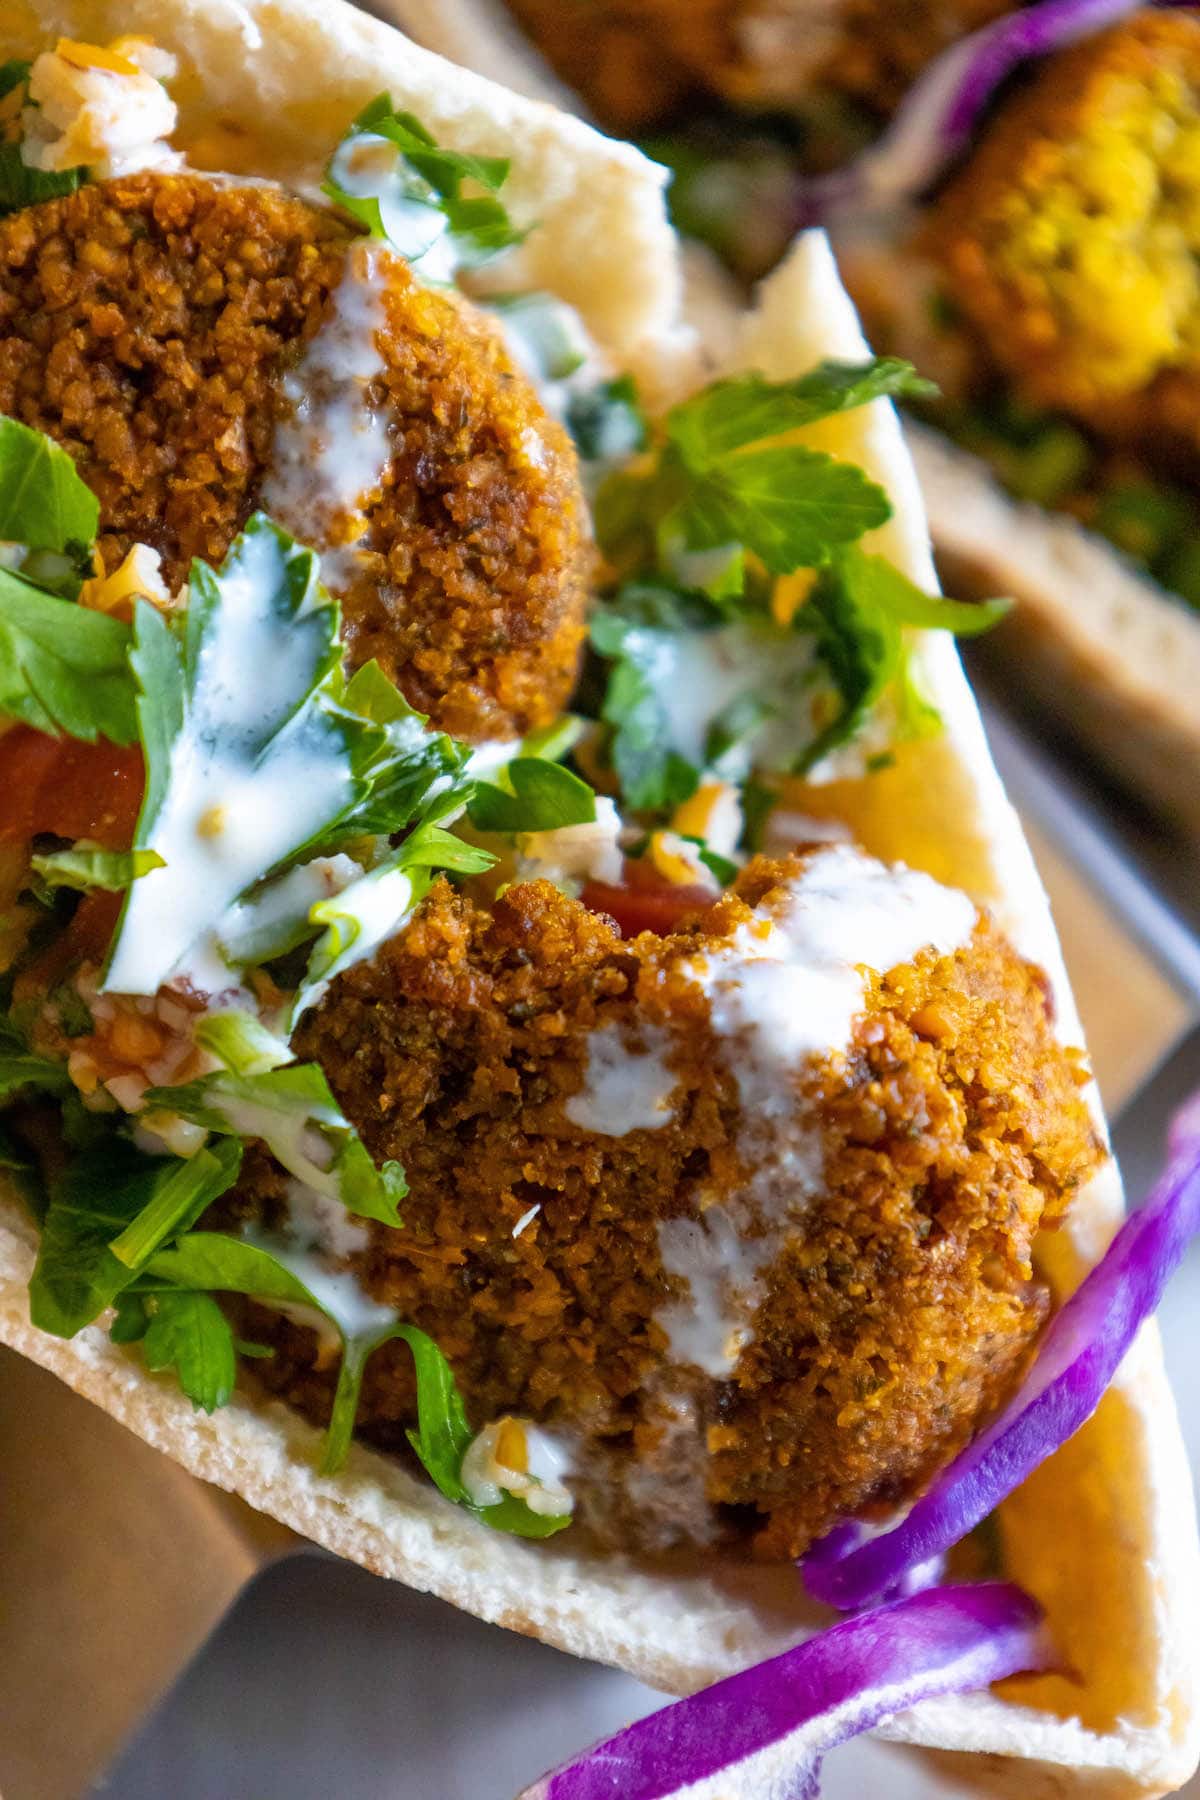 pita stuffed with falafel balls, cabbage, and salad with tahini sauce ladled on top